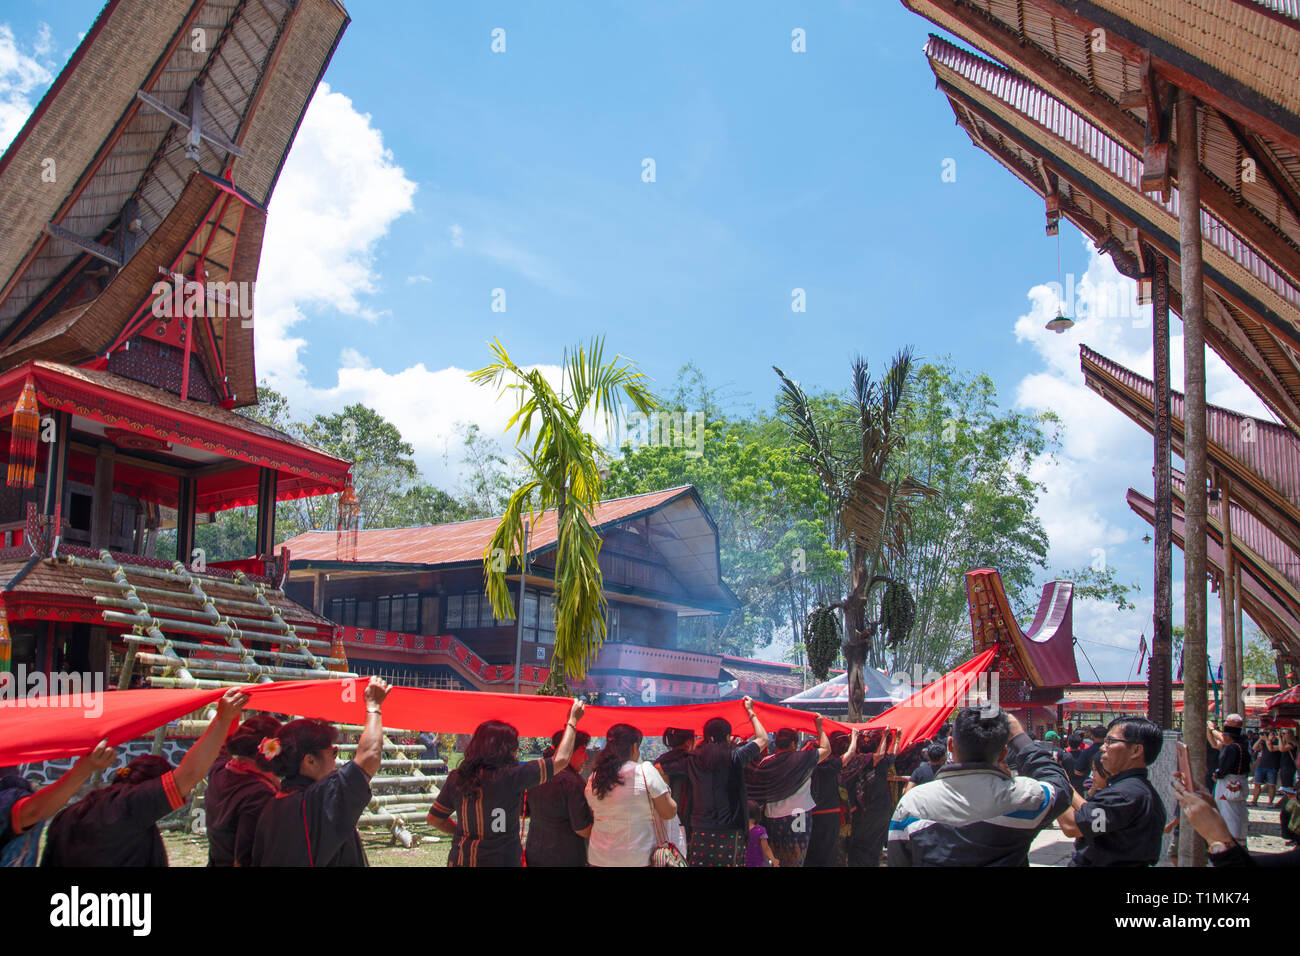 A funeral procession and ritual in a village in Tana Toraja, Sulawesi, Indonesia Stock Photo